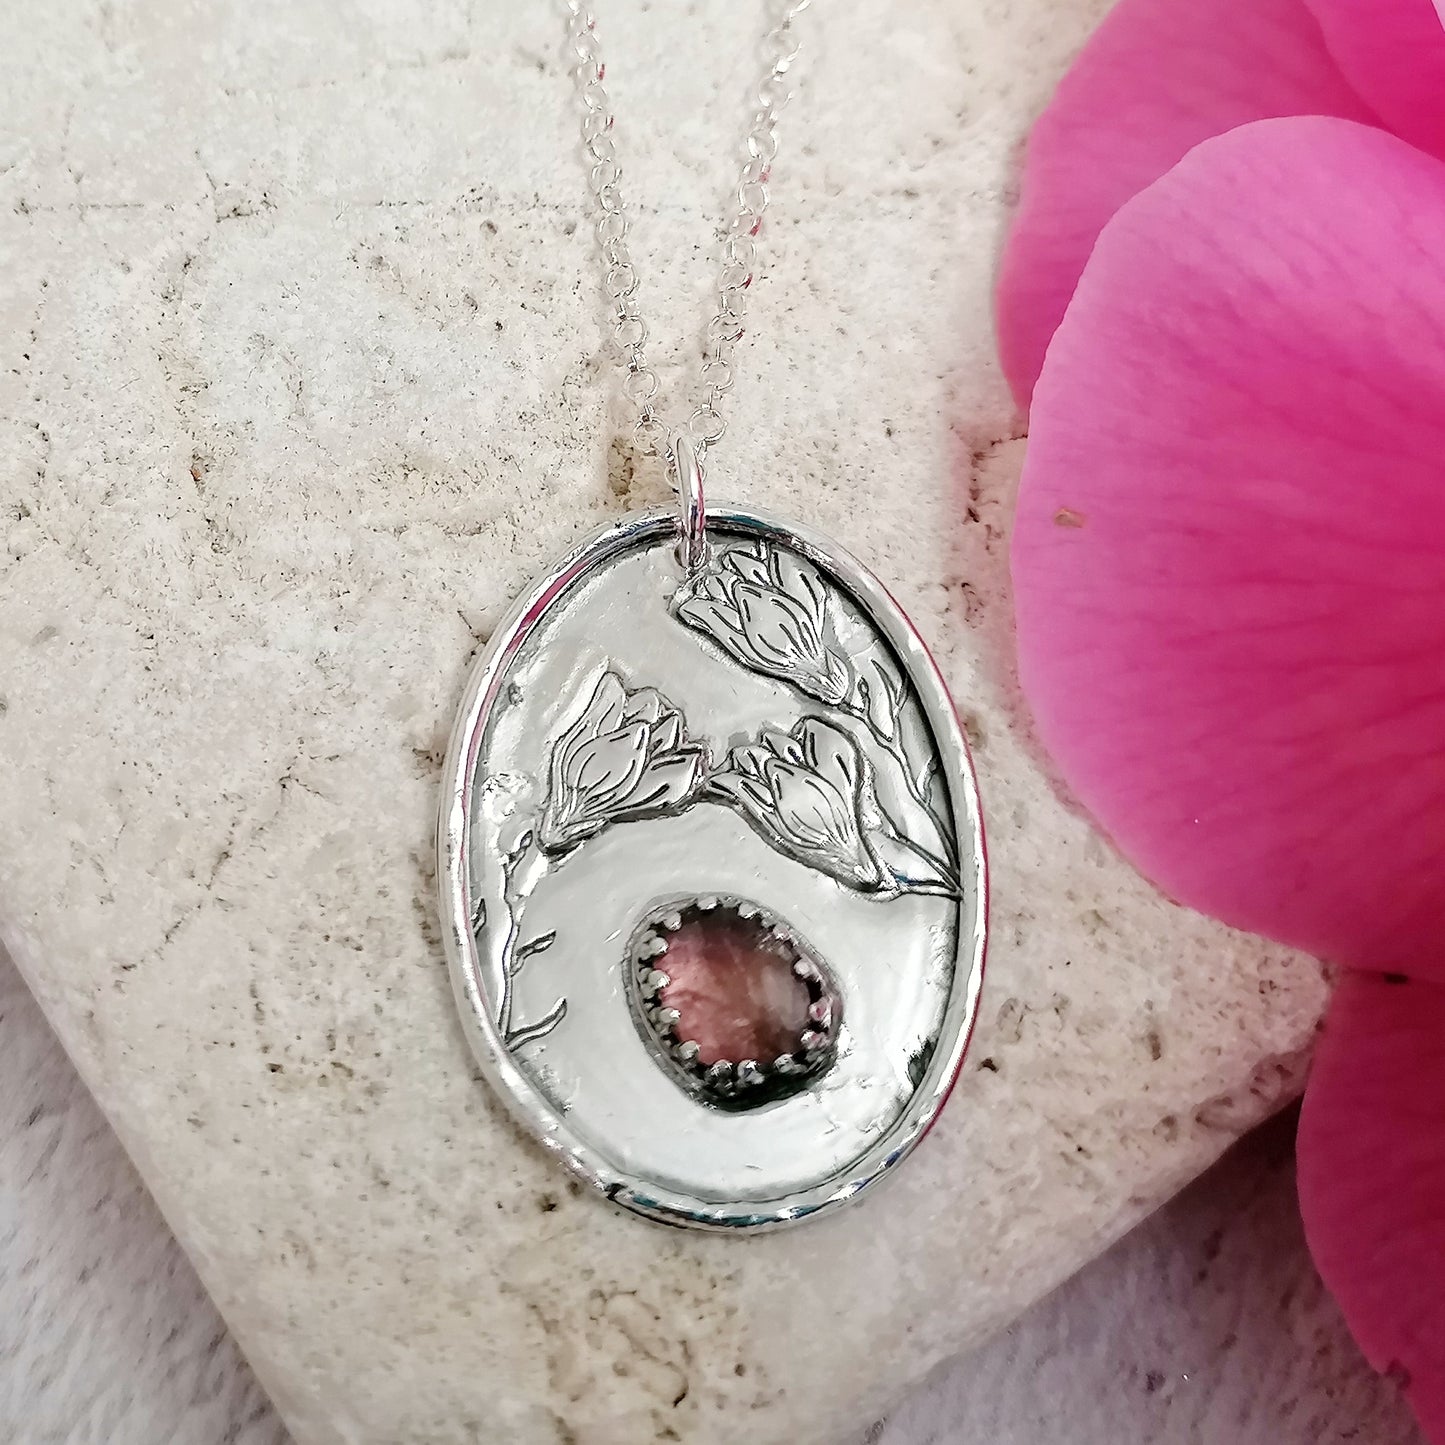 Magnolia Flowers and Tourmaline Necklace